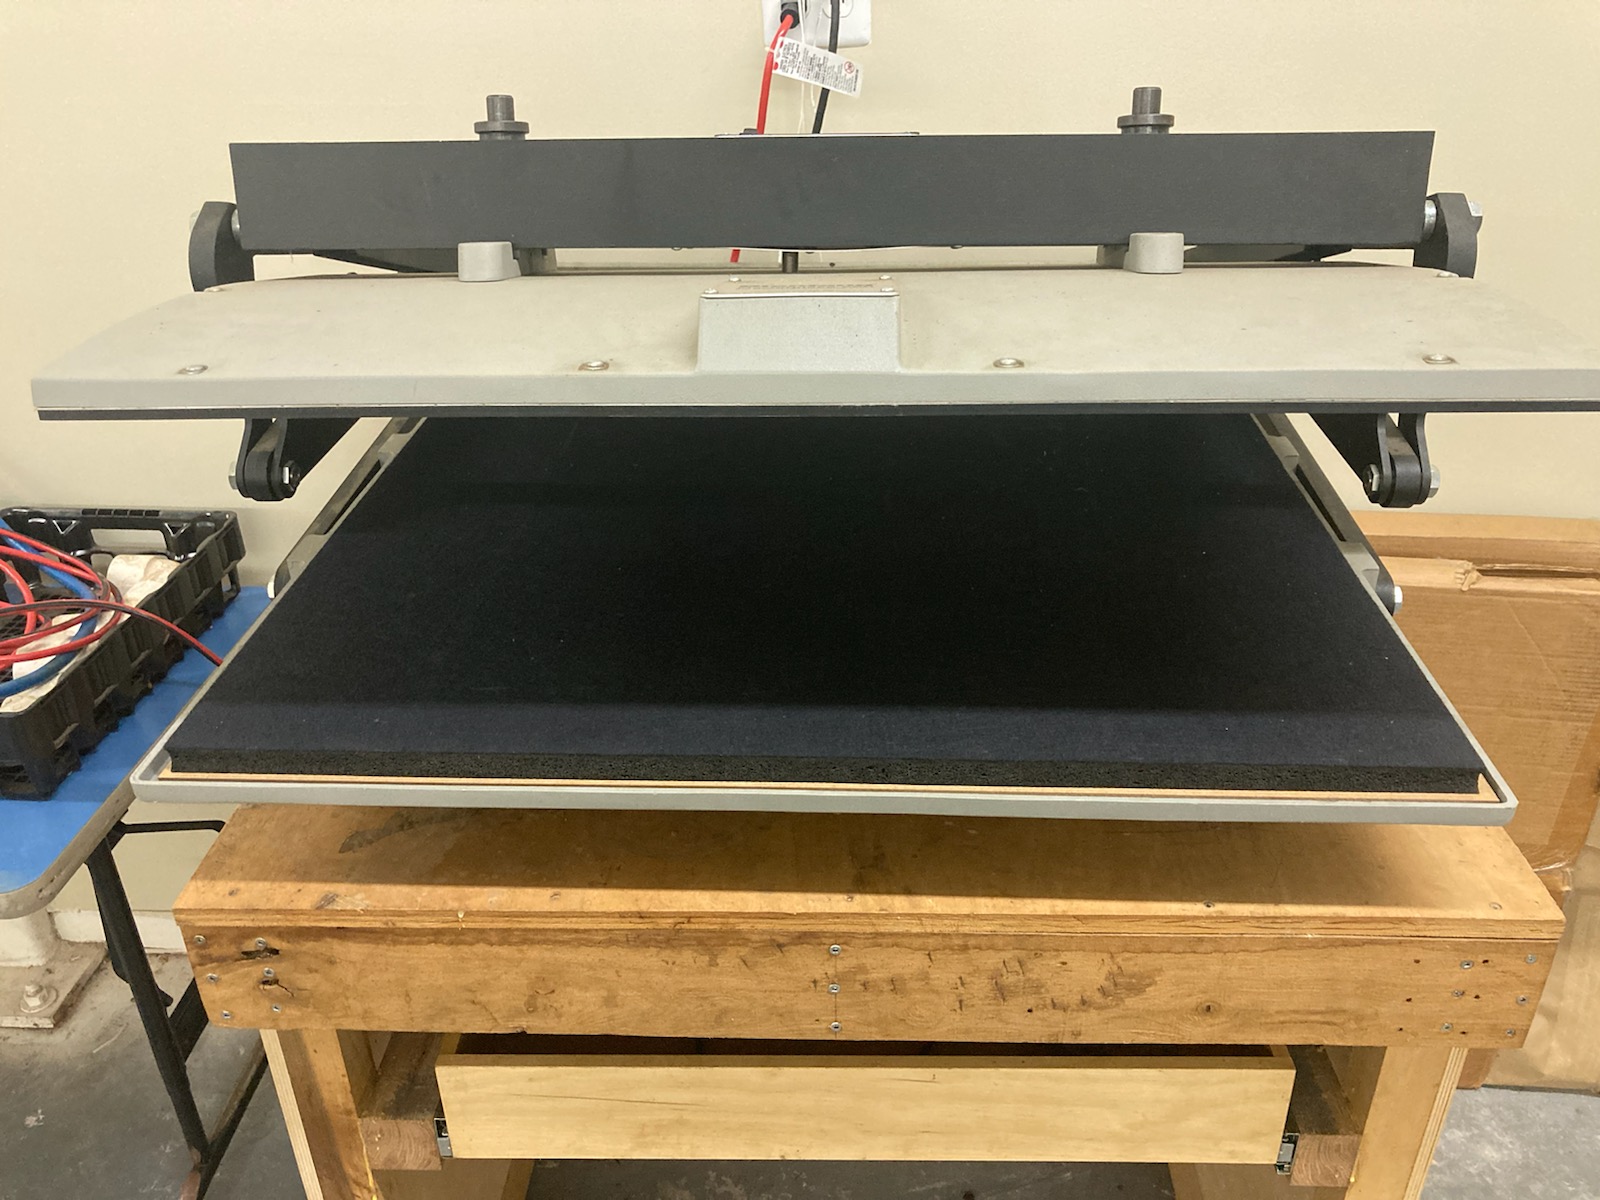 Picture Framing Equipment Lot: Mitre Mite VN2+1 Joiner / Vnailer / Underpinner, Fletcher 3000 60″ Multi Material Cutter, Fletcher 8448 48″ Multi Material Cutter, Fletcher 2100 60″ Mat Cutter, Bienfang Masterpiece 550 Mechanical Heat Press, ITW AMP Mini Miter Fillet Cutter, Canvas Stretching Tools, Flat Files, & Torit Dust Collector (Used) Item # UE-112720B (Louisiana)